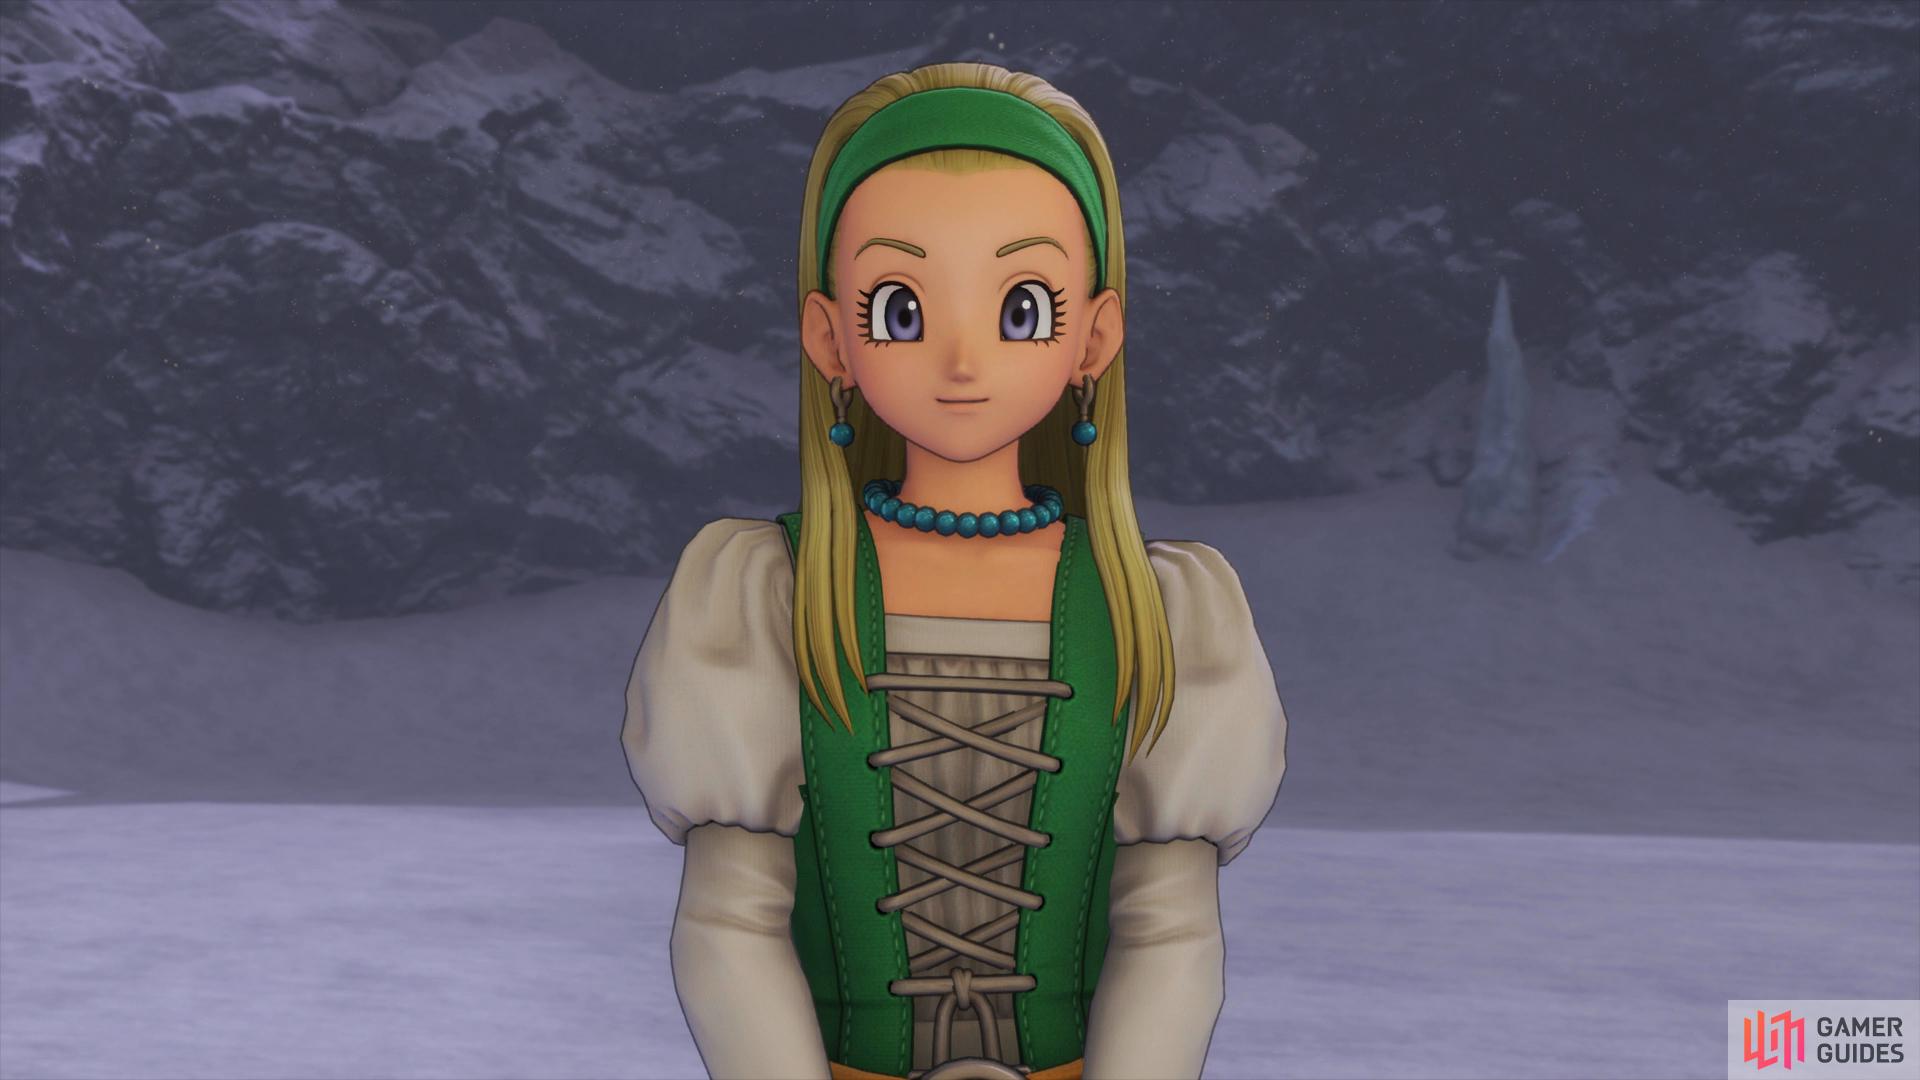 Dragon Quest XI: Echoes of an Elusive Age Definitive Edition Screenshot